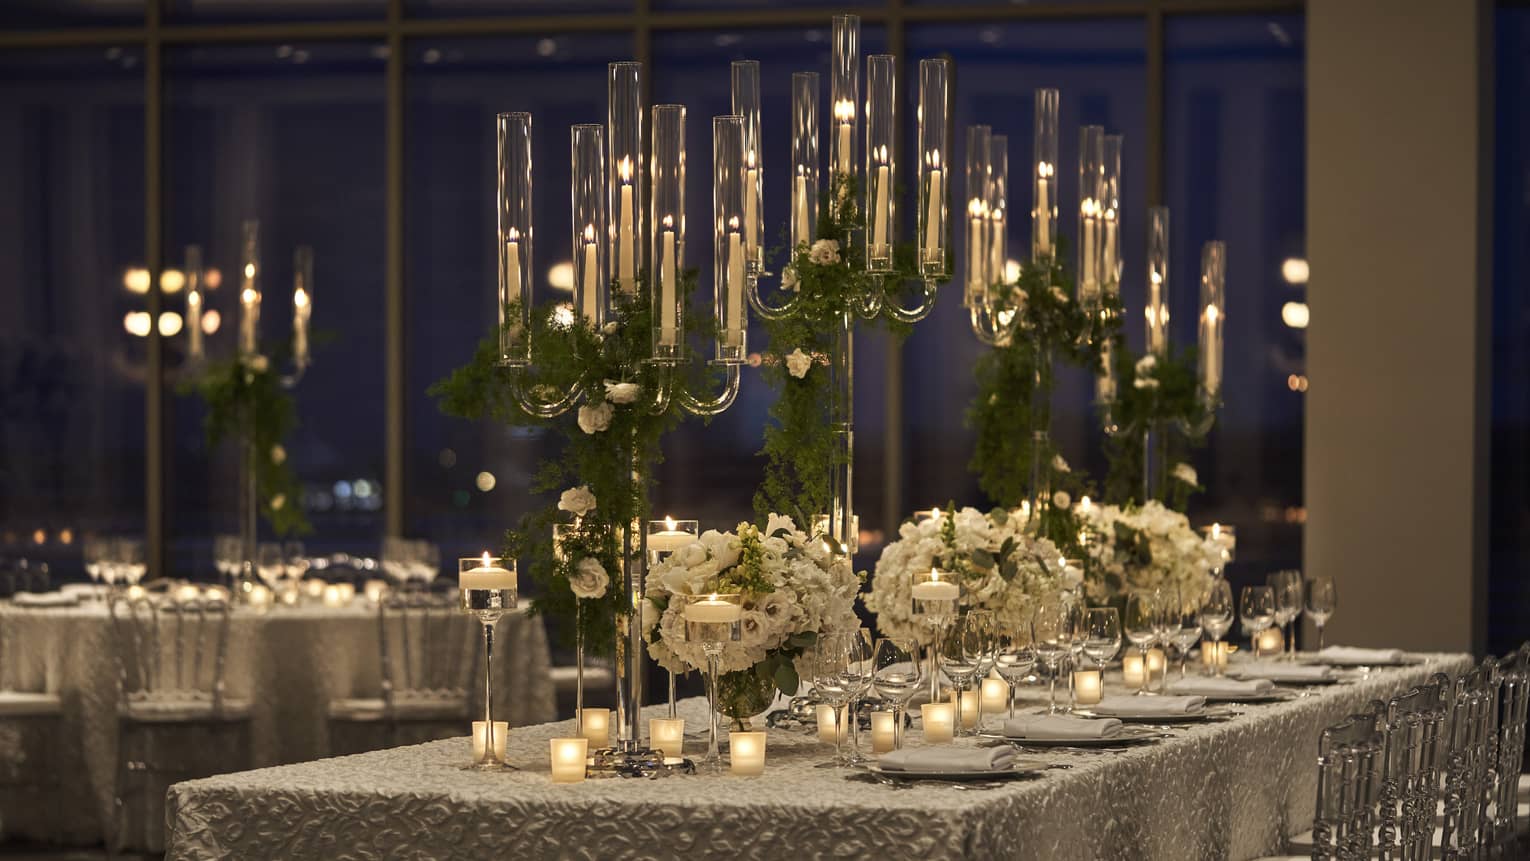 Long tables with table cloth, tall candles, and flowers.